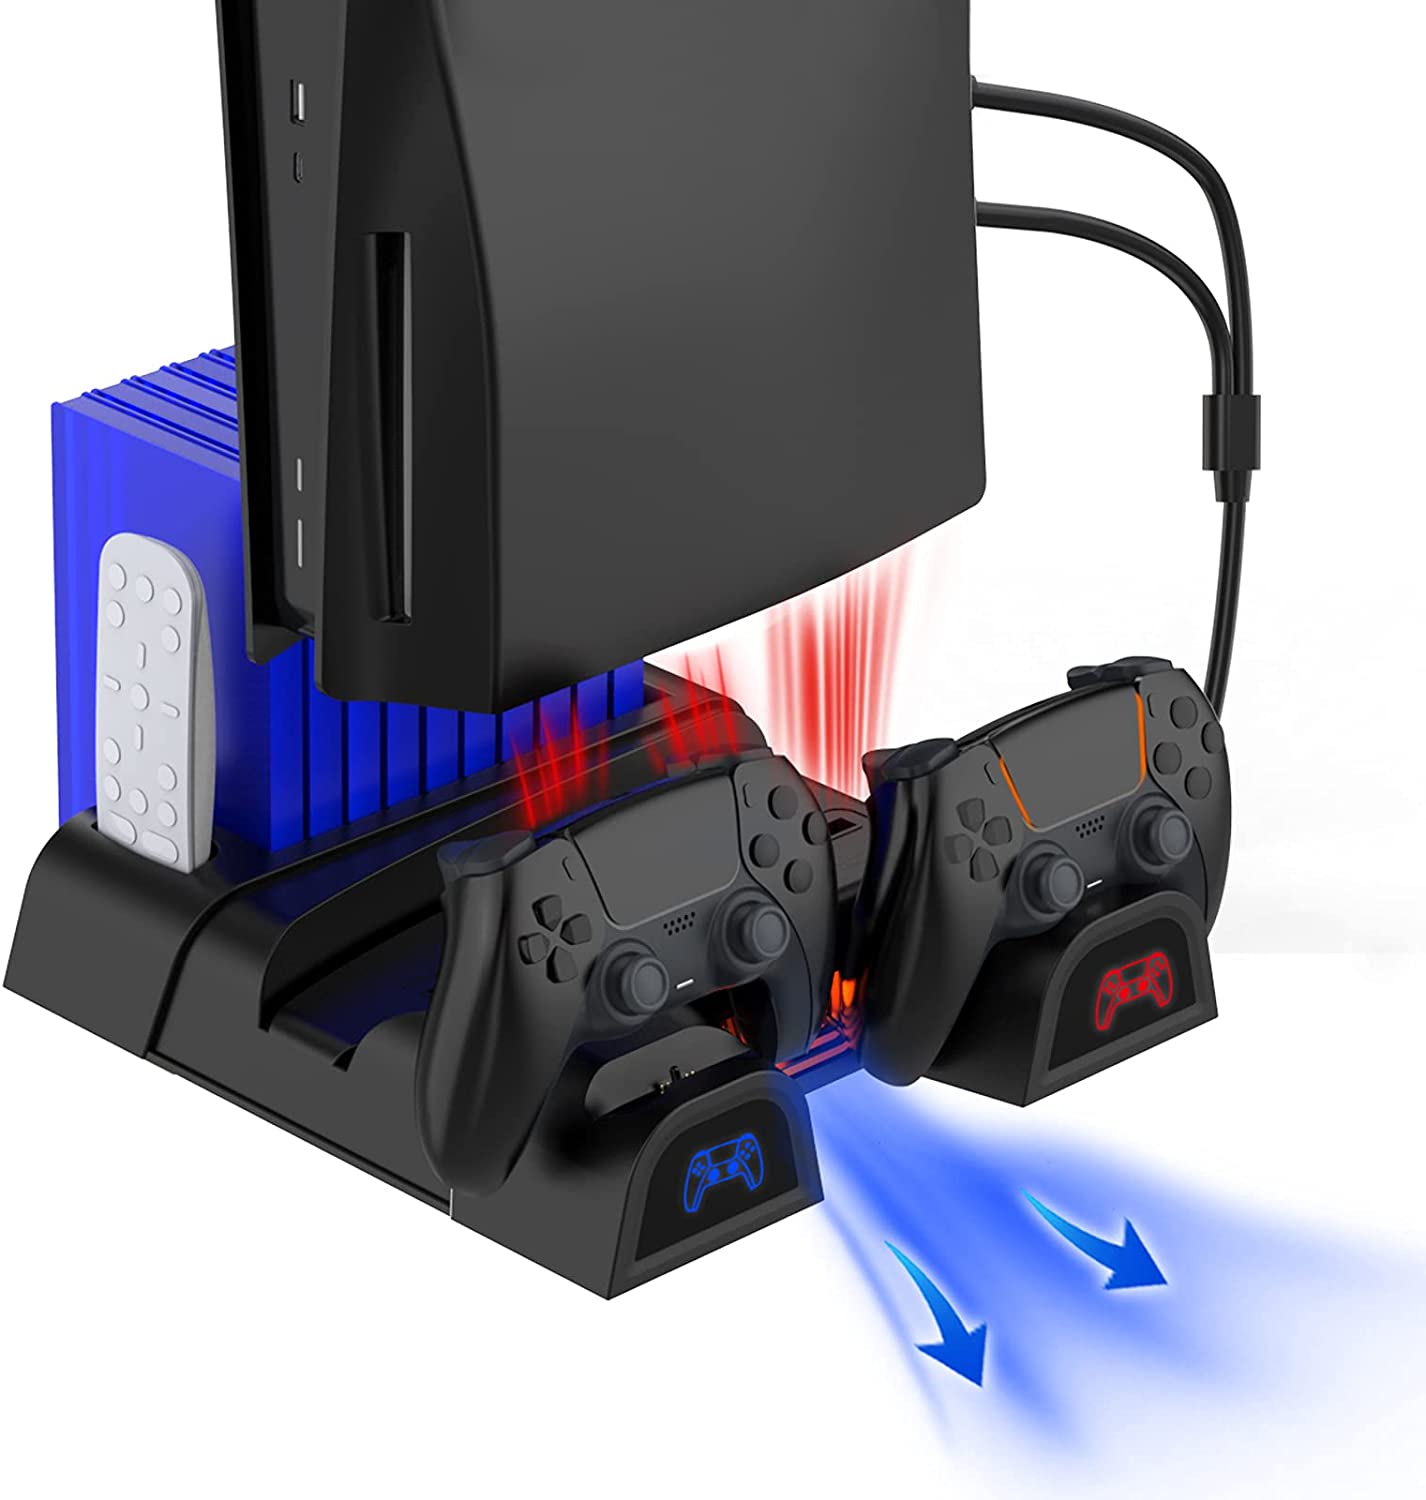 The black NexiGo 05100 charging stand charges PS5 controllers and dissipates heat for the console.